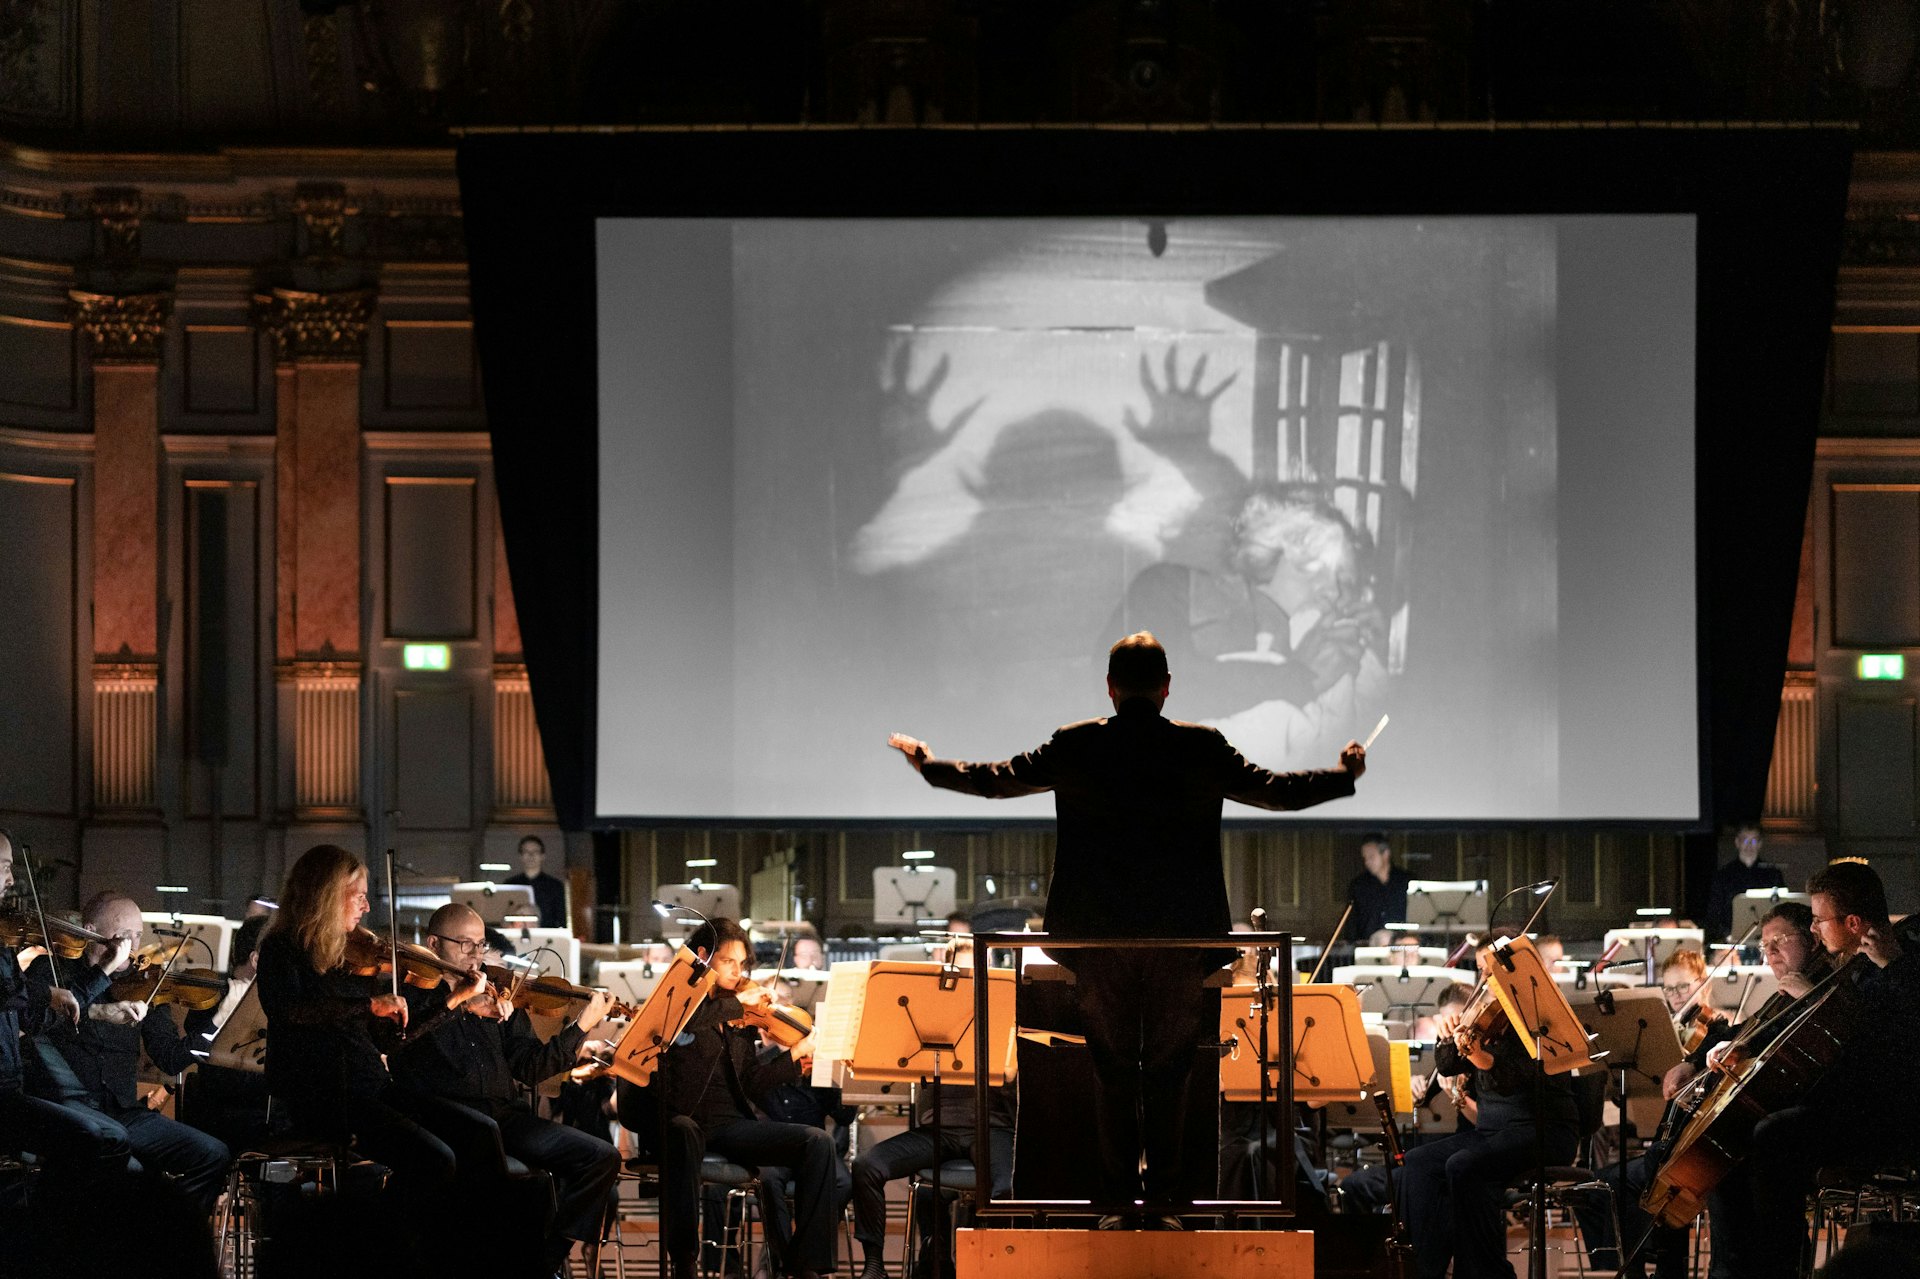  The scores of the IFMC finalists are performed live during the "Cinema in Concert" gala. © Gaëtan Bally